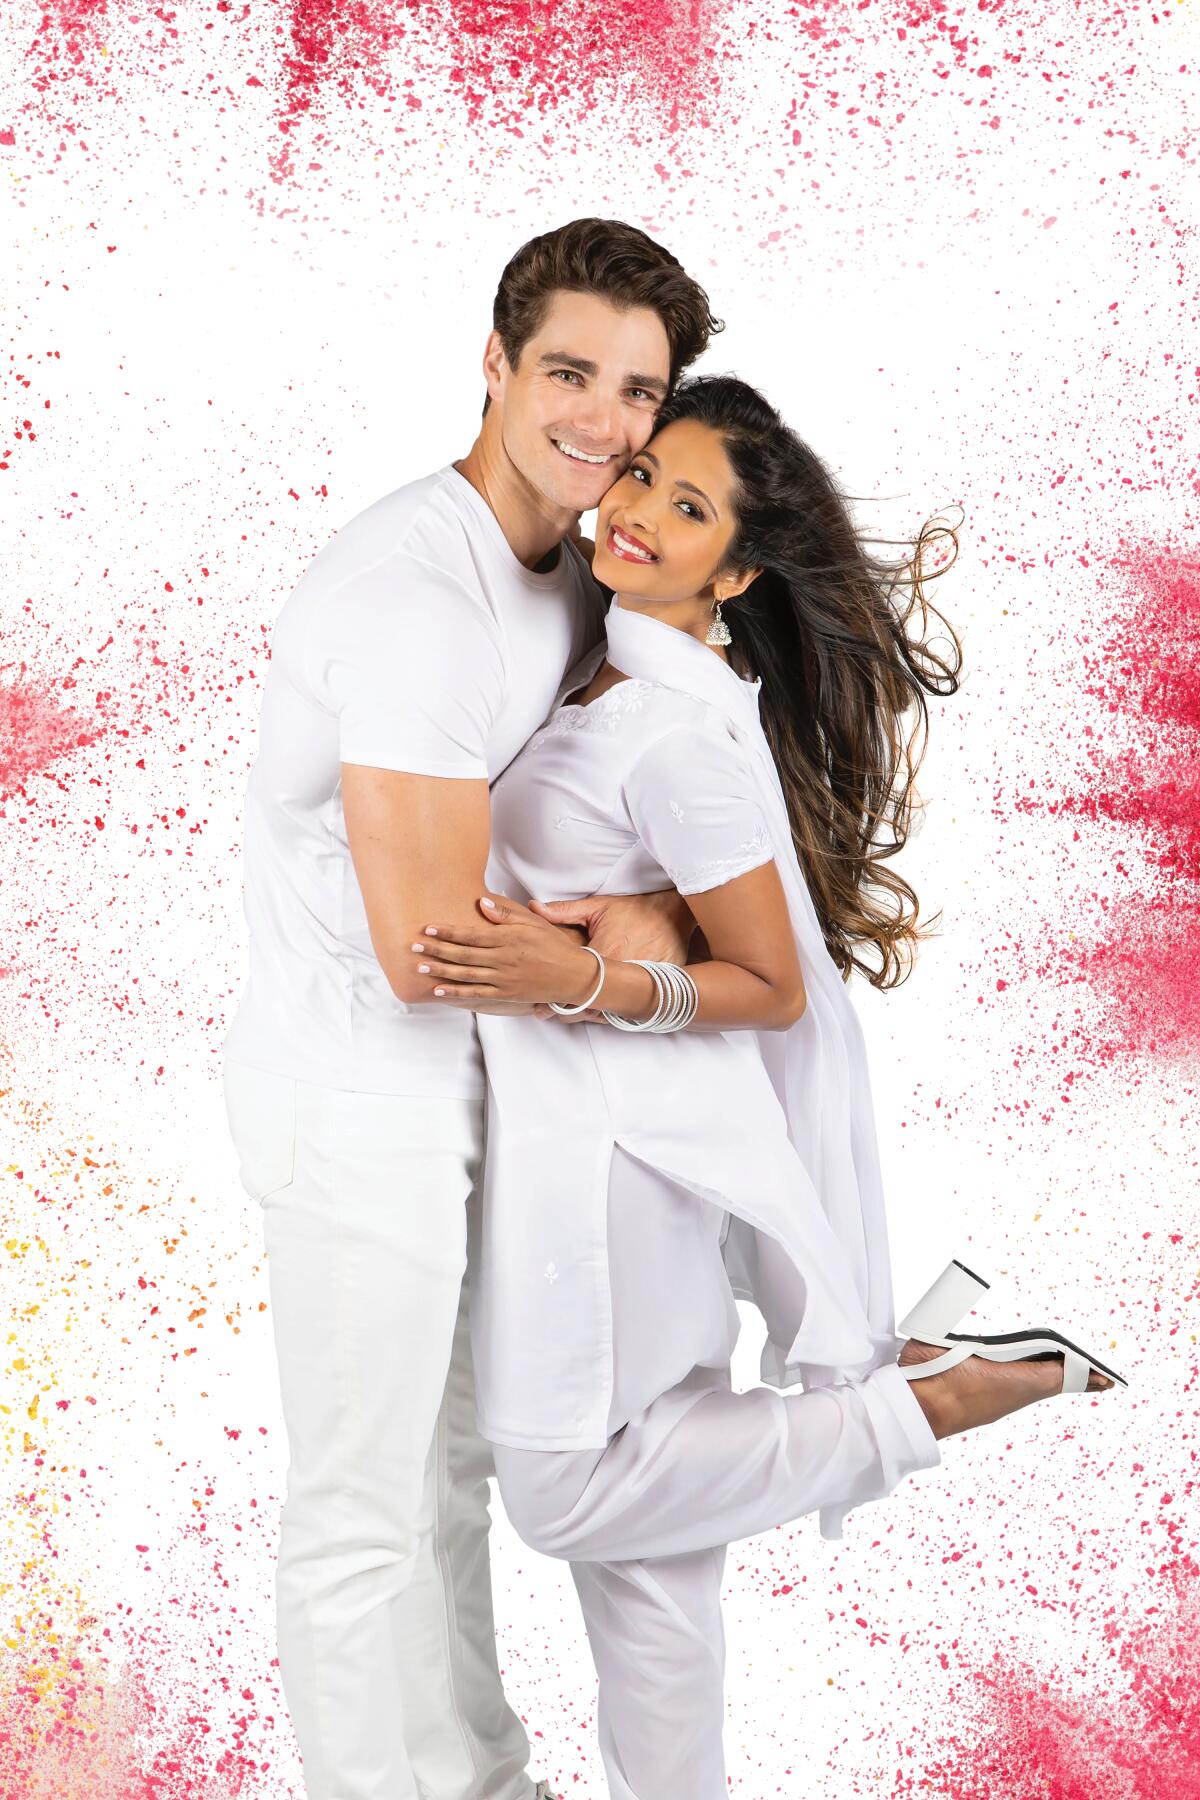 Austin Colby and Shoba Narayan co-star as Rog and Simran in "Come Fall in Love — The DDLJ Musical" at the Old Globe Theatre.